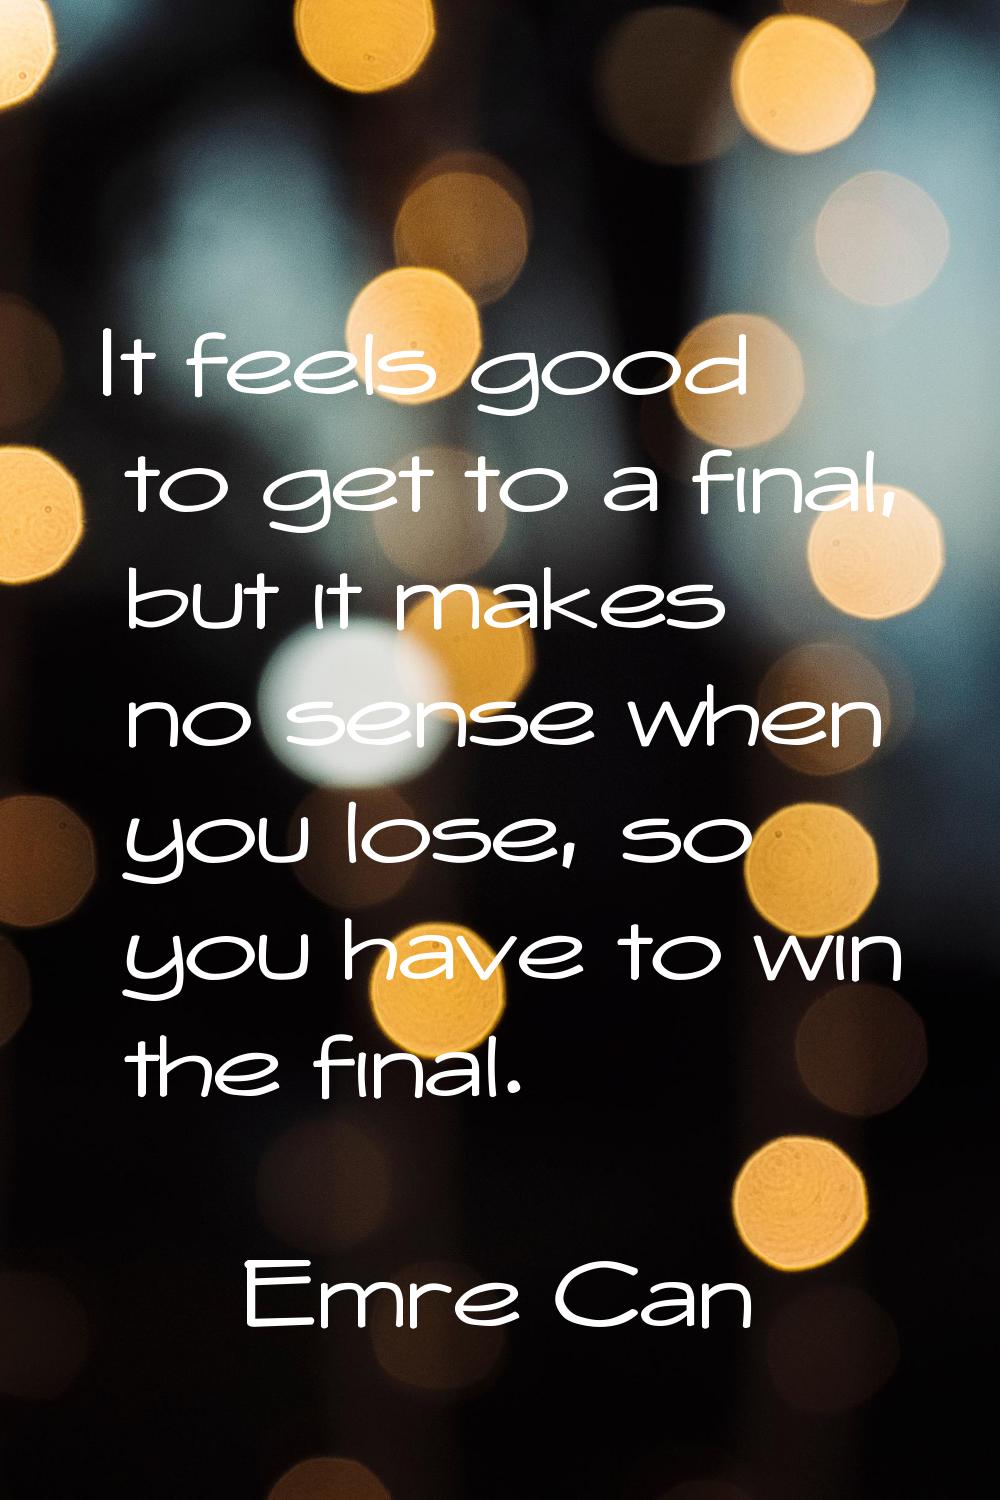 It feels good to get to a final, but it makes no sense when you lose, so you have to win the final.